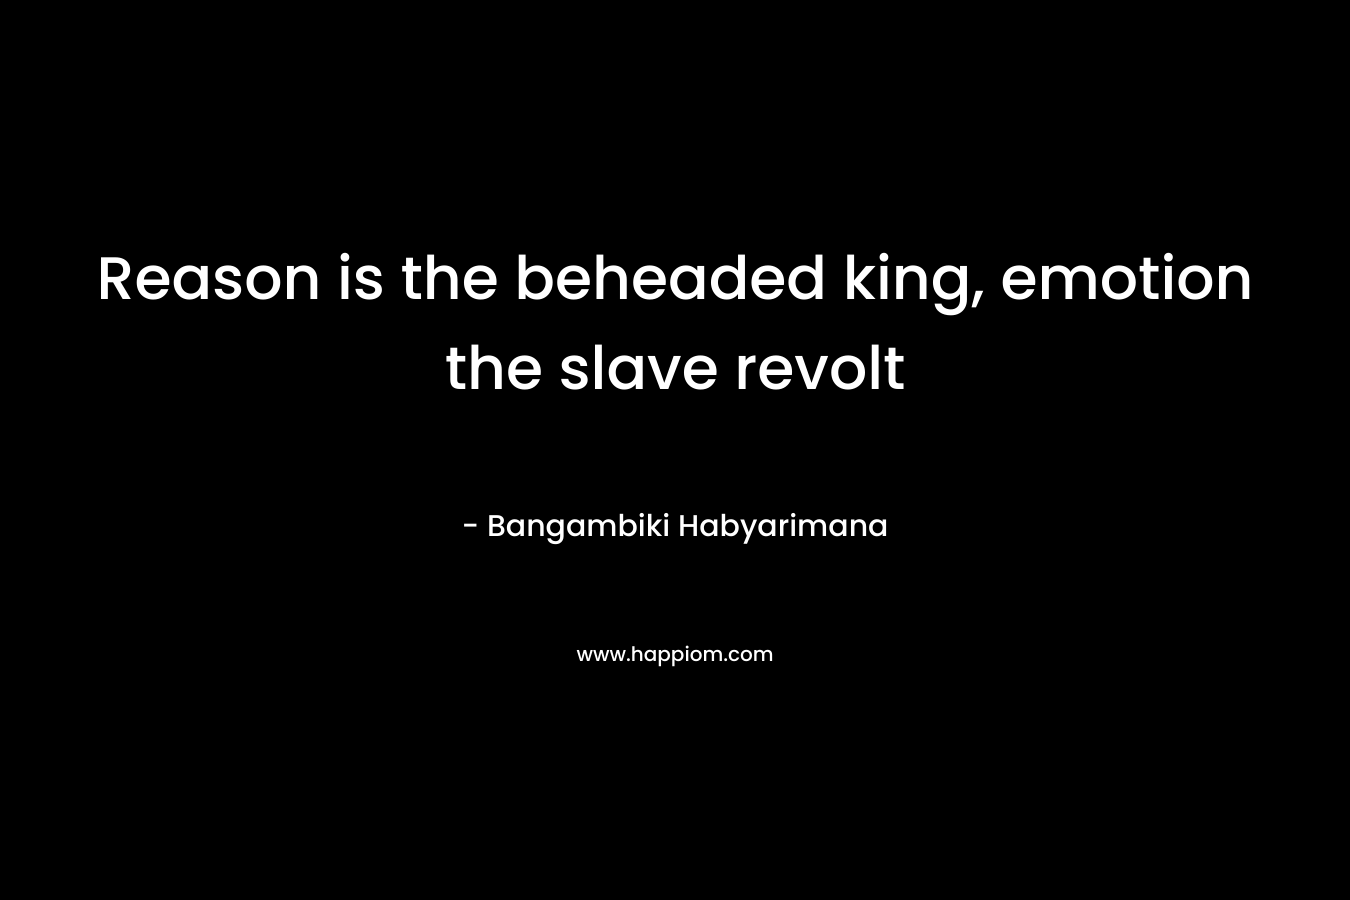 Reason is the beheaded king, emotion the slave revolt